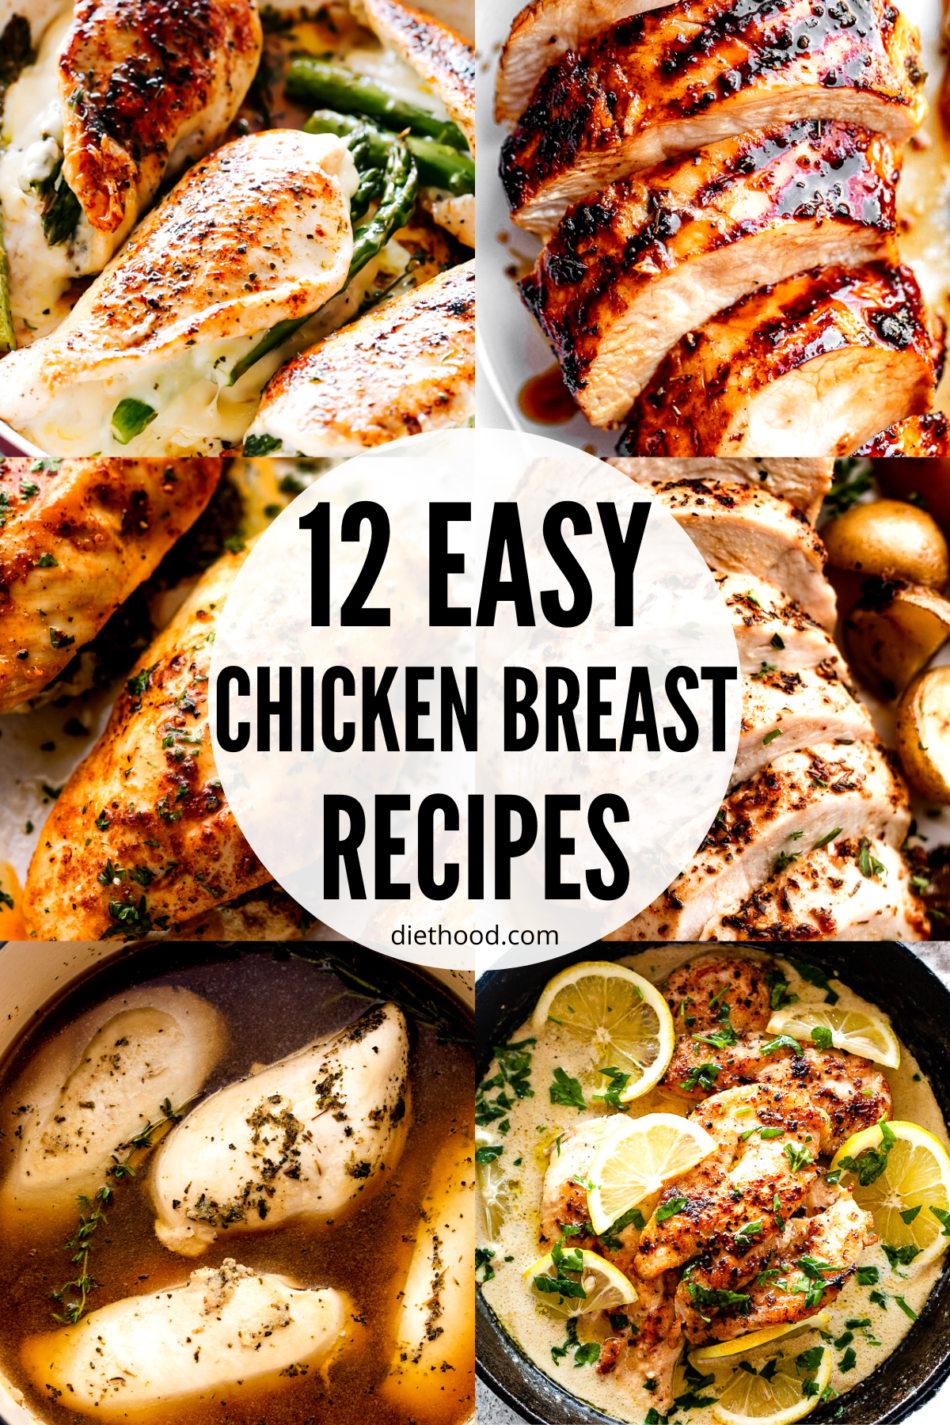 12 Easy Chicken Breast Recipes – Juicy, Tender, and Totally Foolproof!